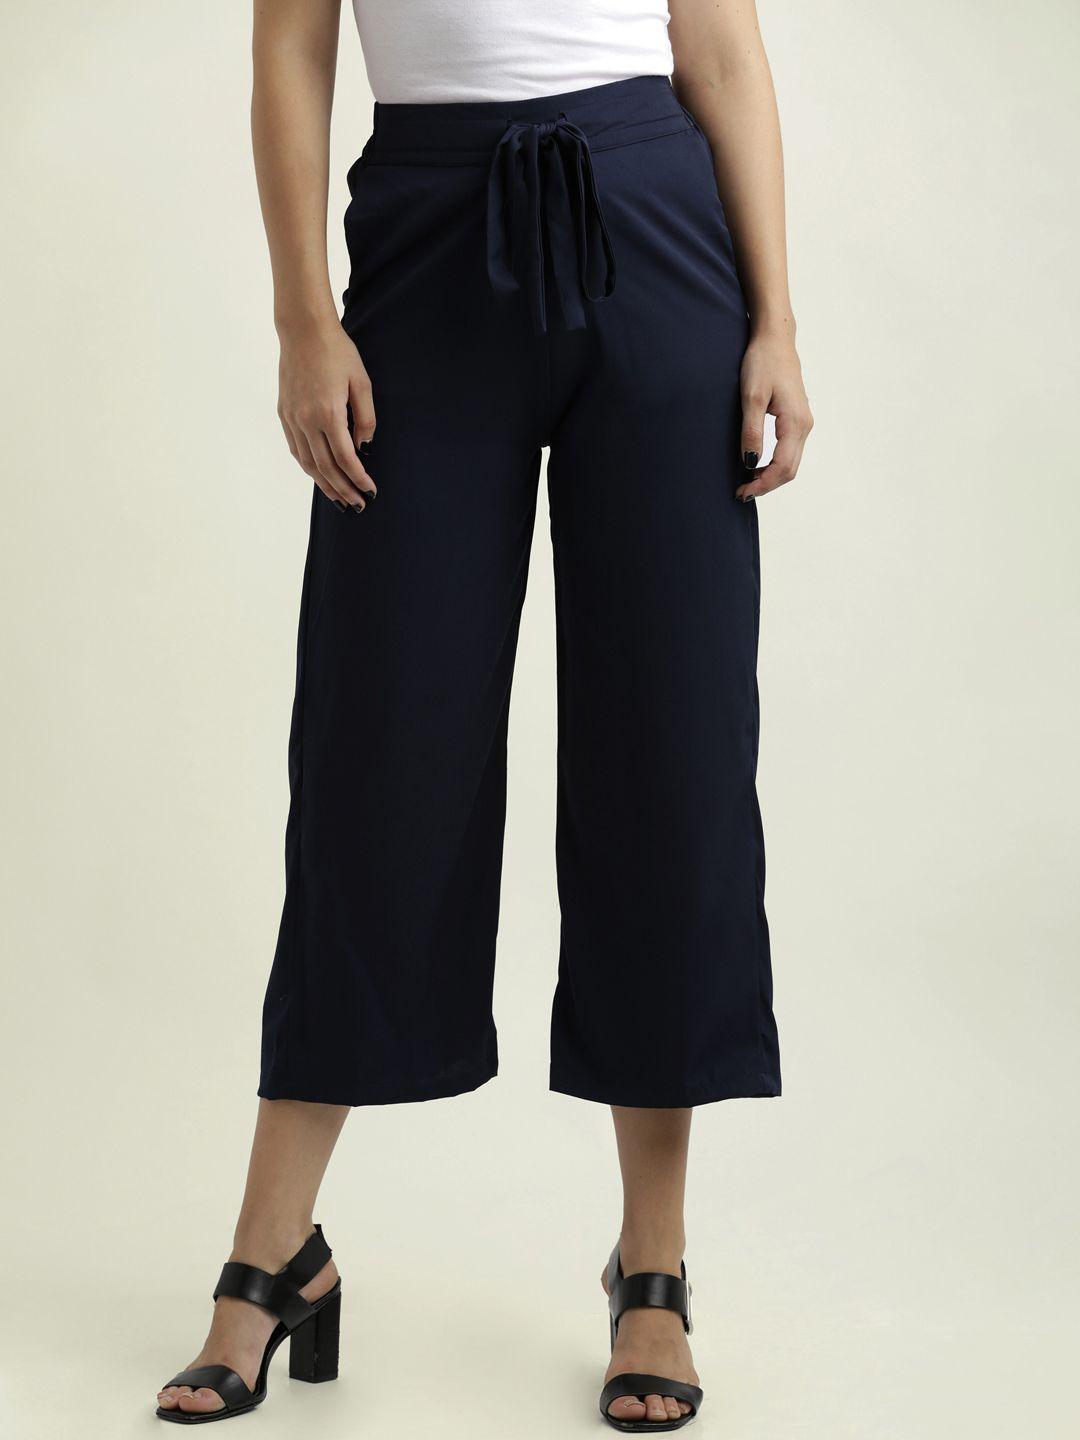 miss chase women navy blue regular fit solid culottes